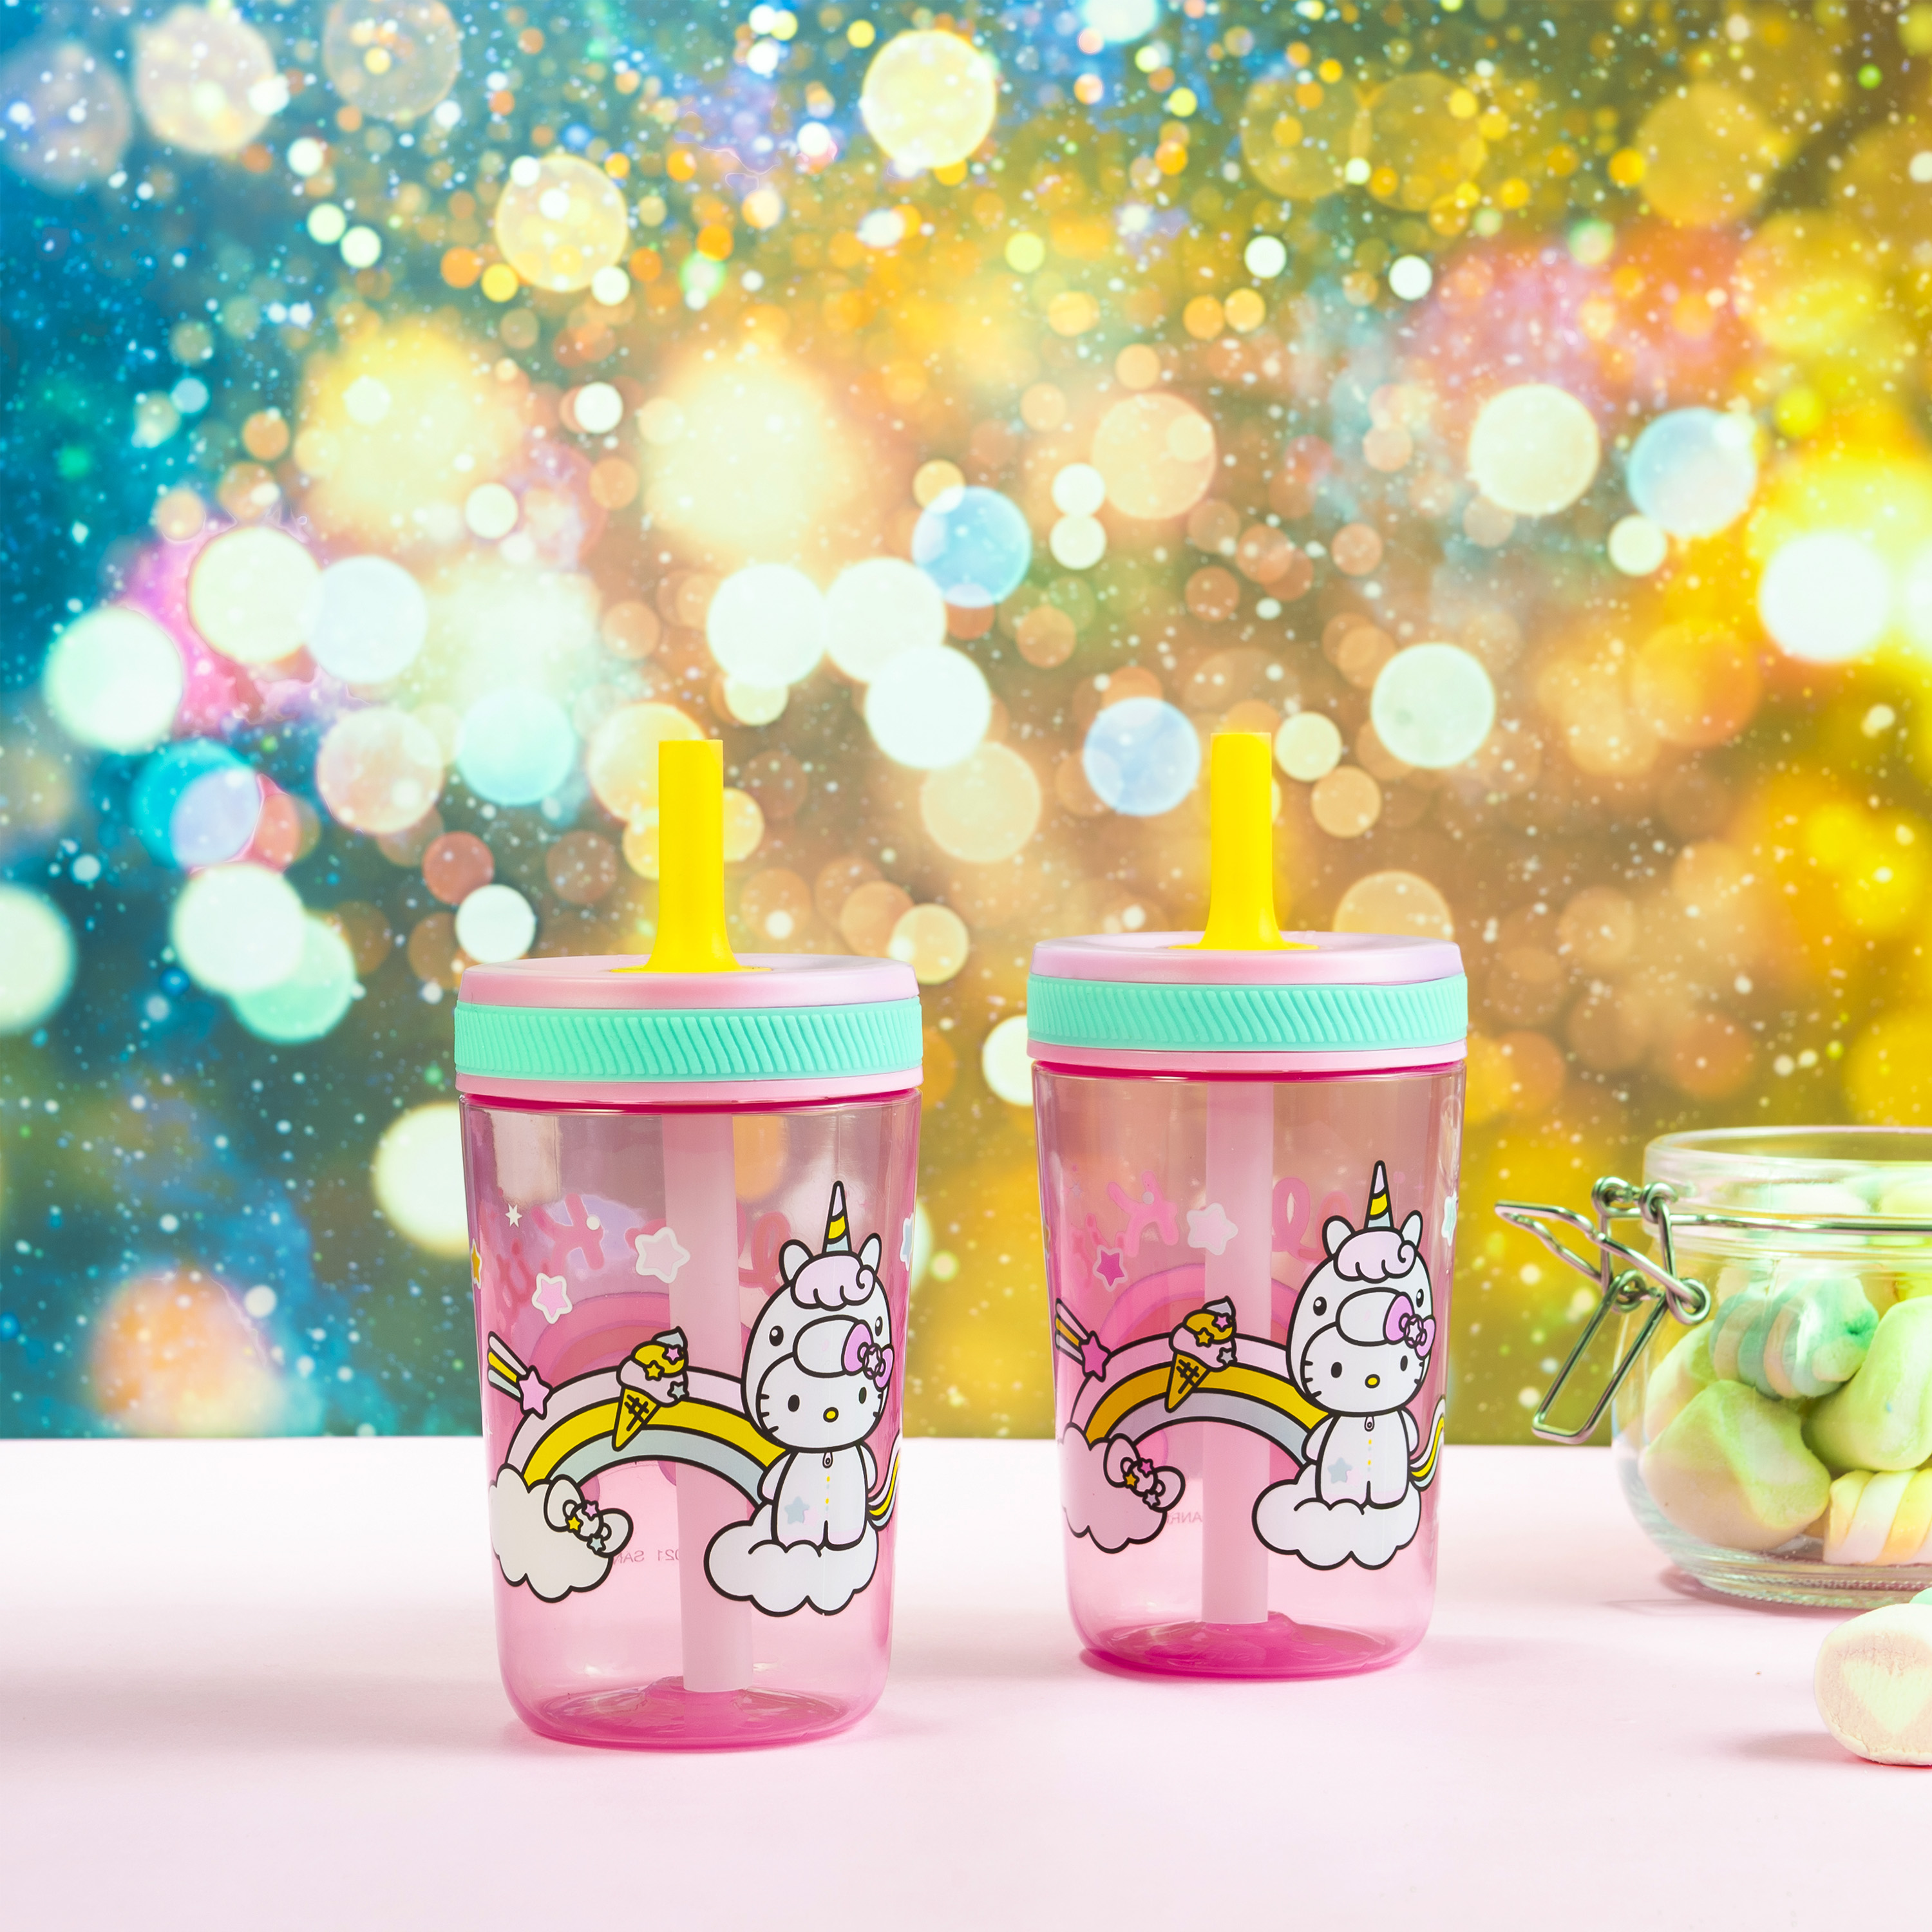 Sanrio 15  ounce Plastic Tumbler with Lid and Straw, Hello Kitty, 2-piece set slideshow image 2